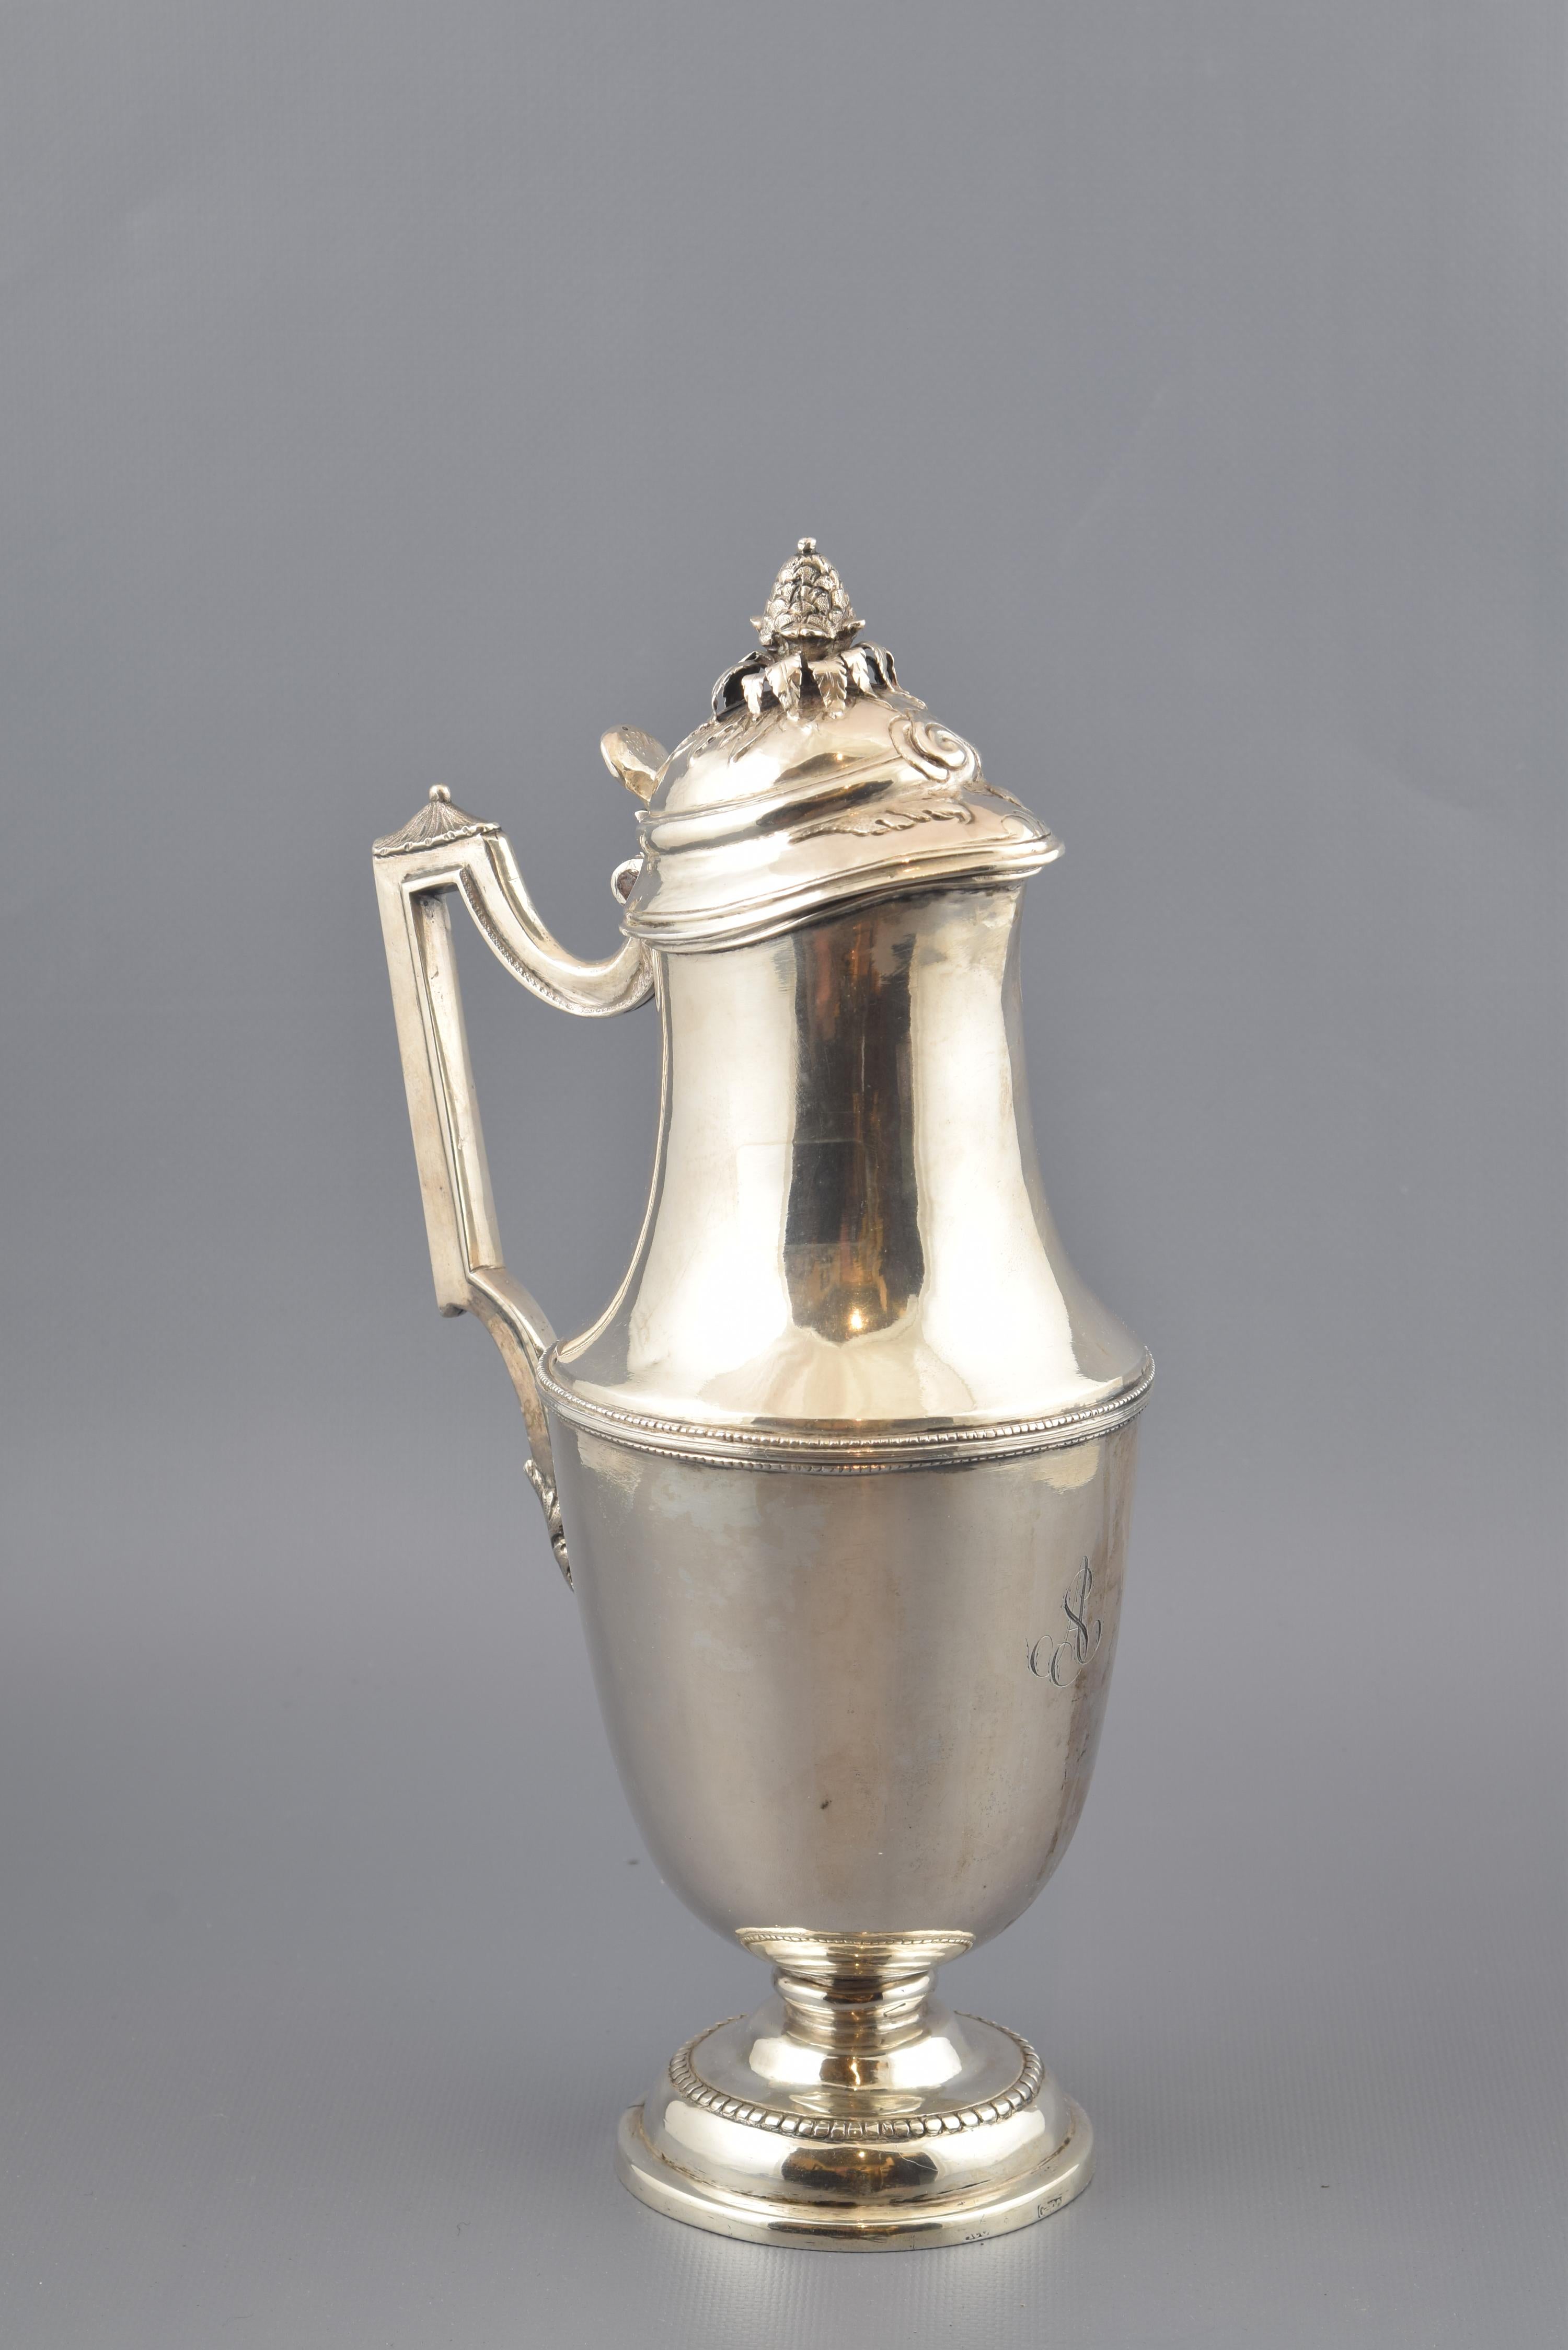 Jug with lid and silver handle in its color that has a circular foot decorated and raised with a series of moldings and a band of pearls, from which part a small foot that gives way to the body of the piece (oval in the lower area and curved in the